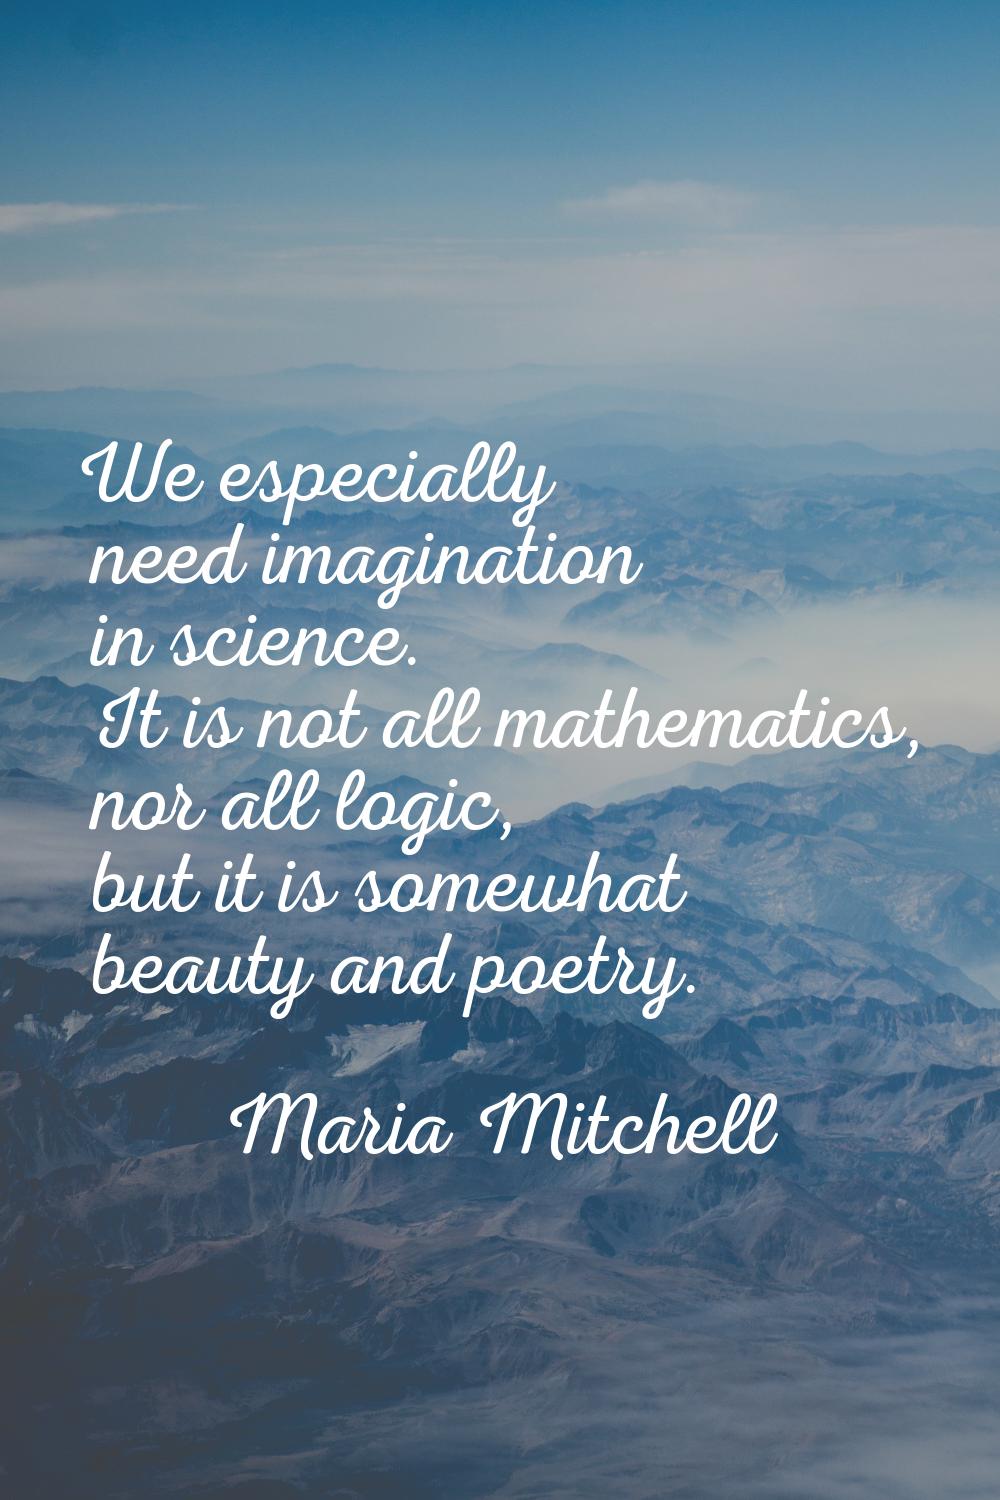 We especially need imagination in science. It is not all mathematics, nor all logic, but it is some